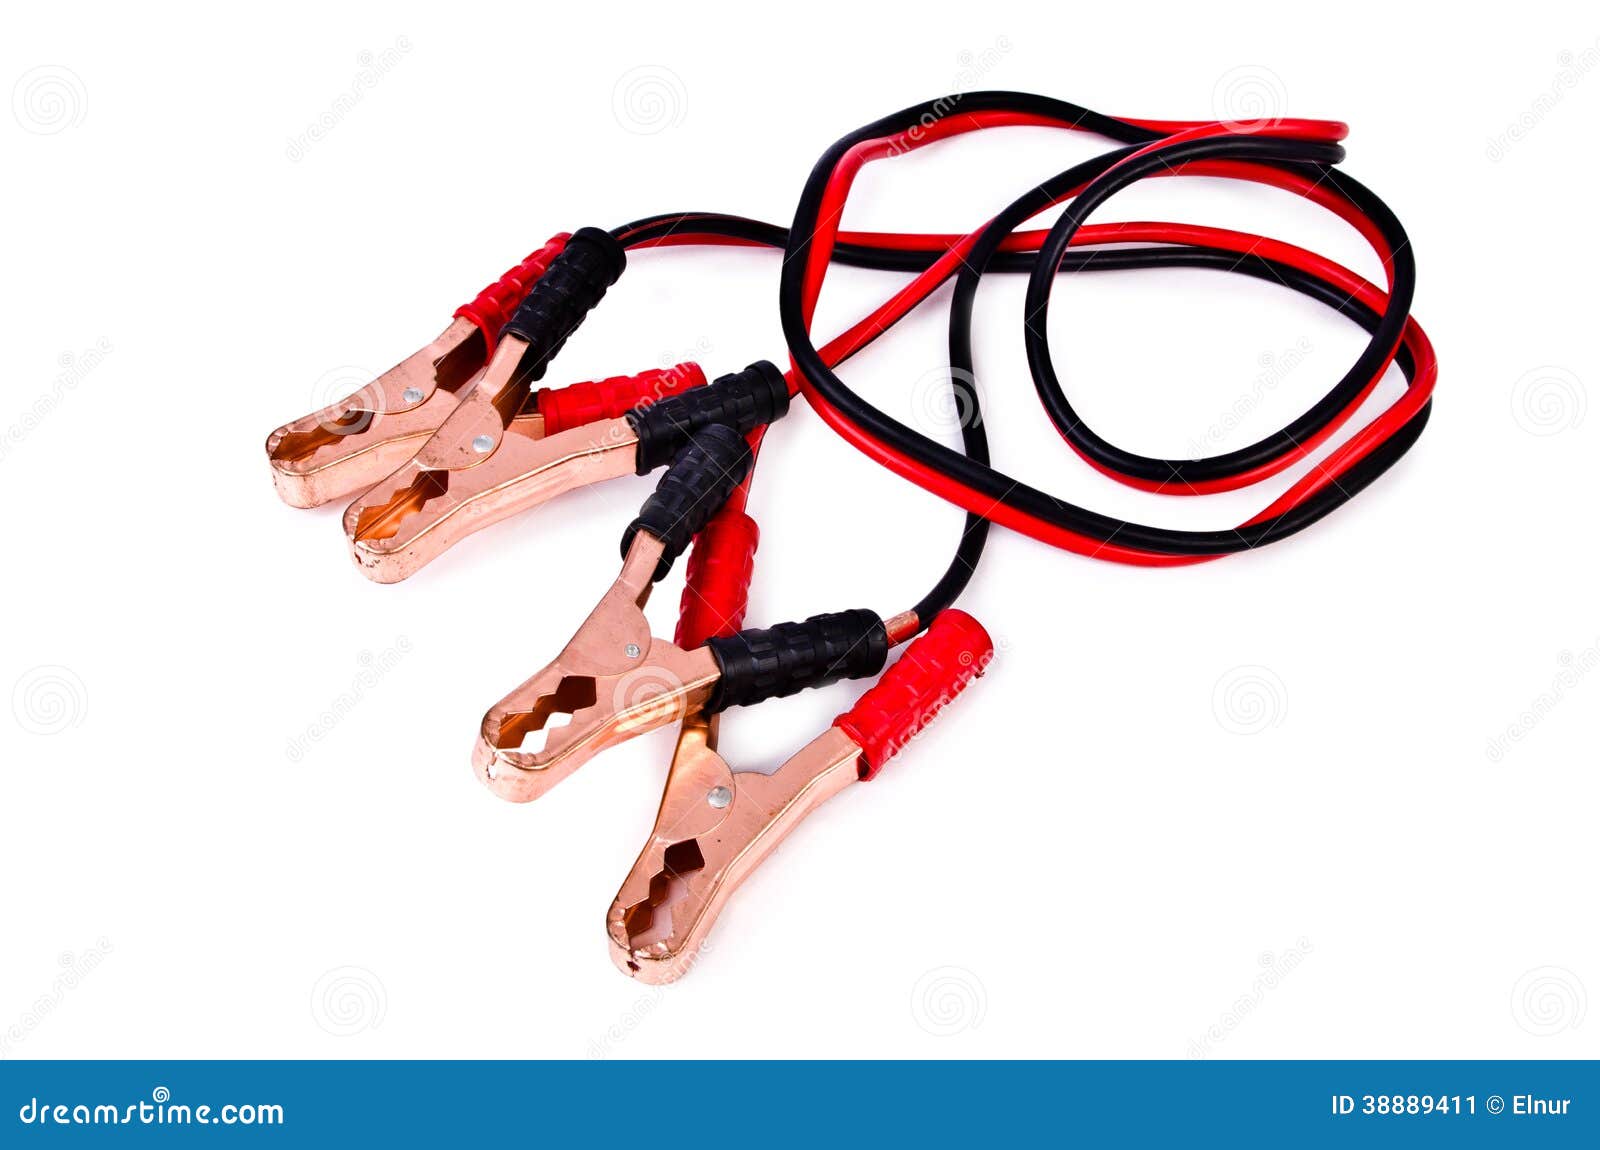 Car Battery Jumpers Stock Photo - Image: 38889411